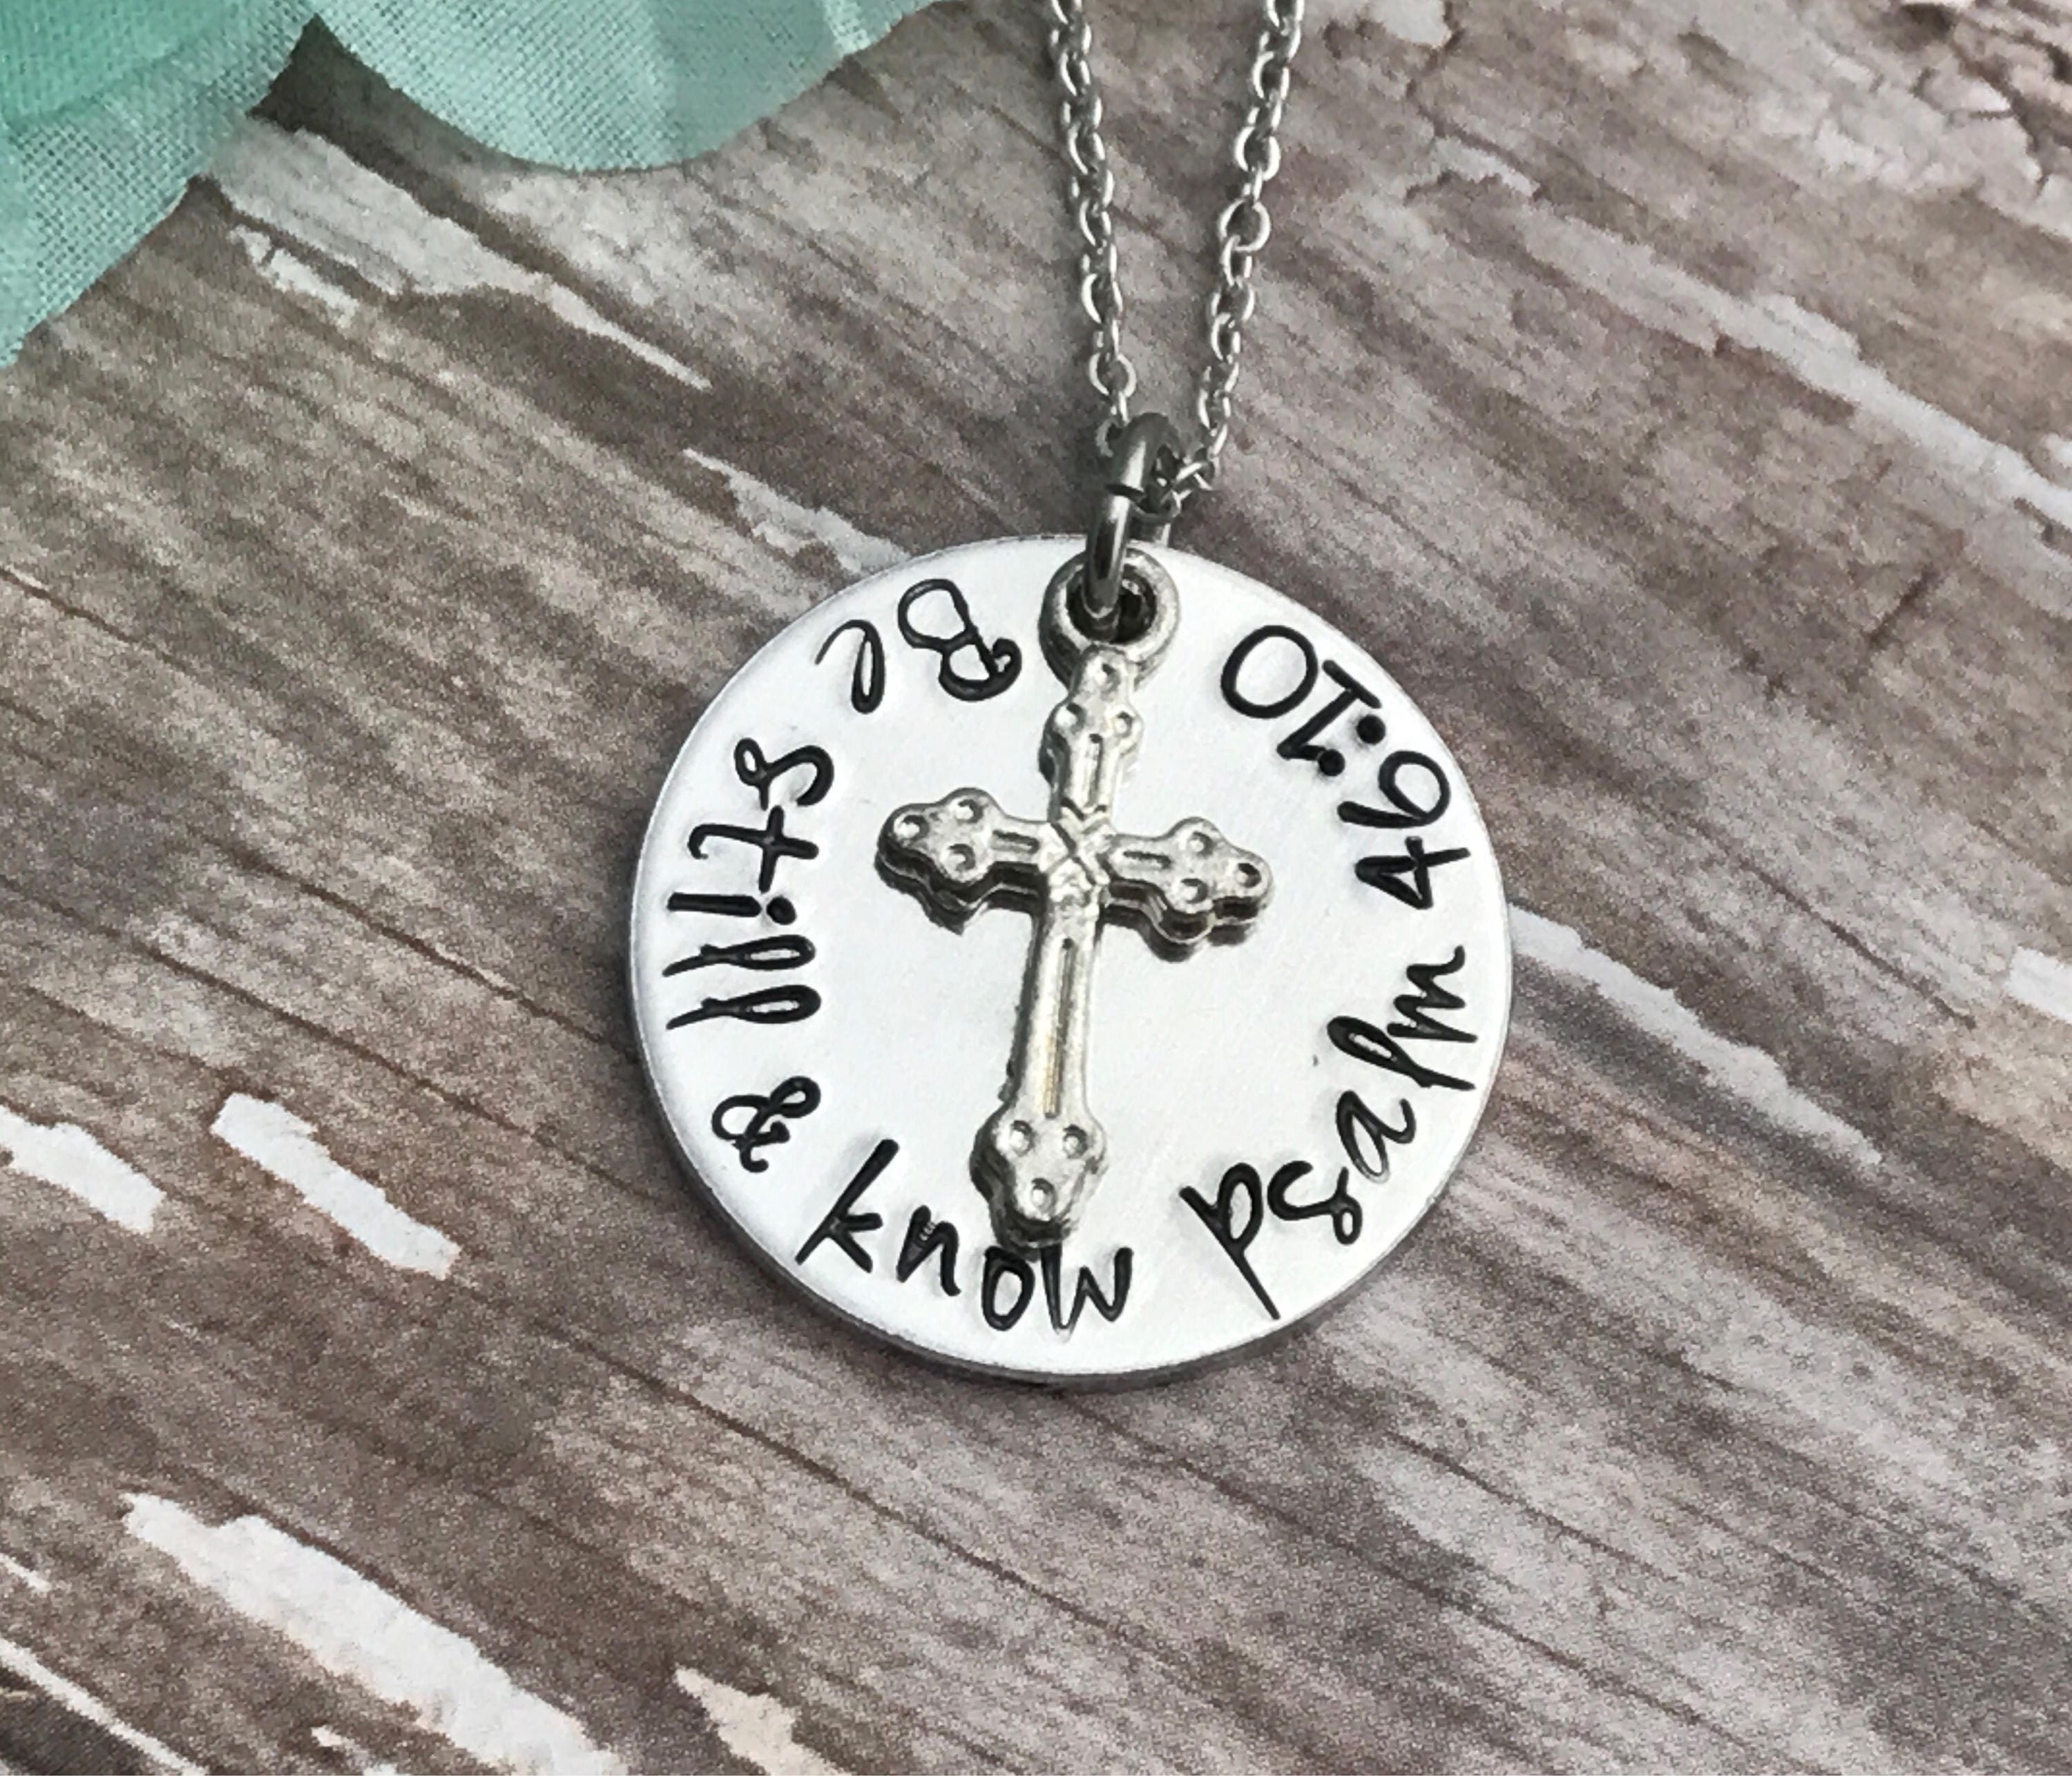 Religious necklace bible verse religion gift god | Etsy